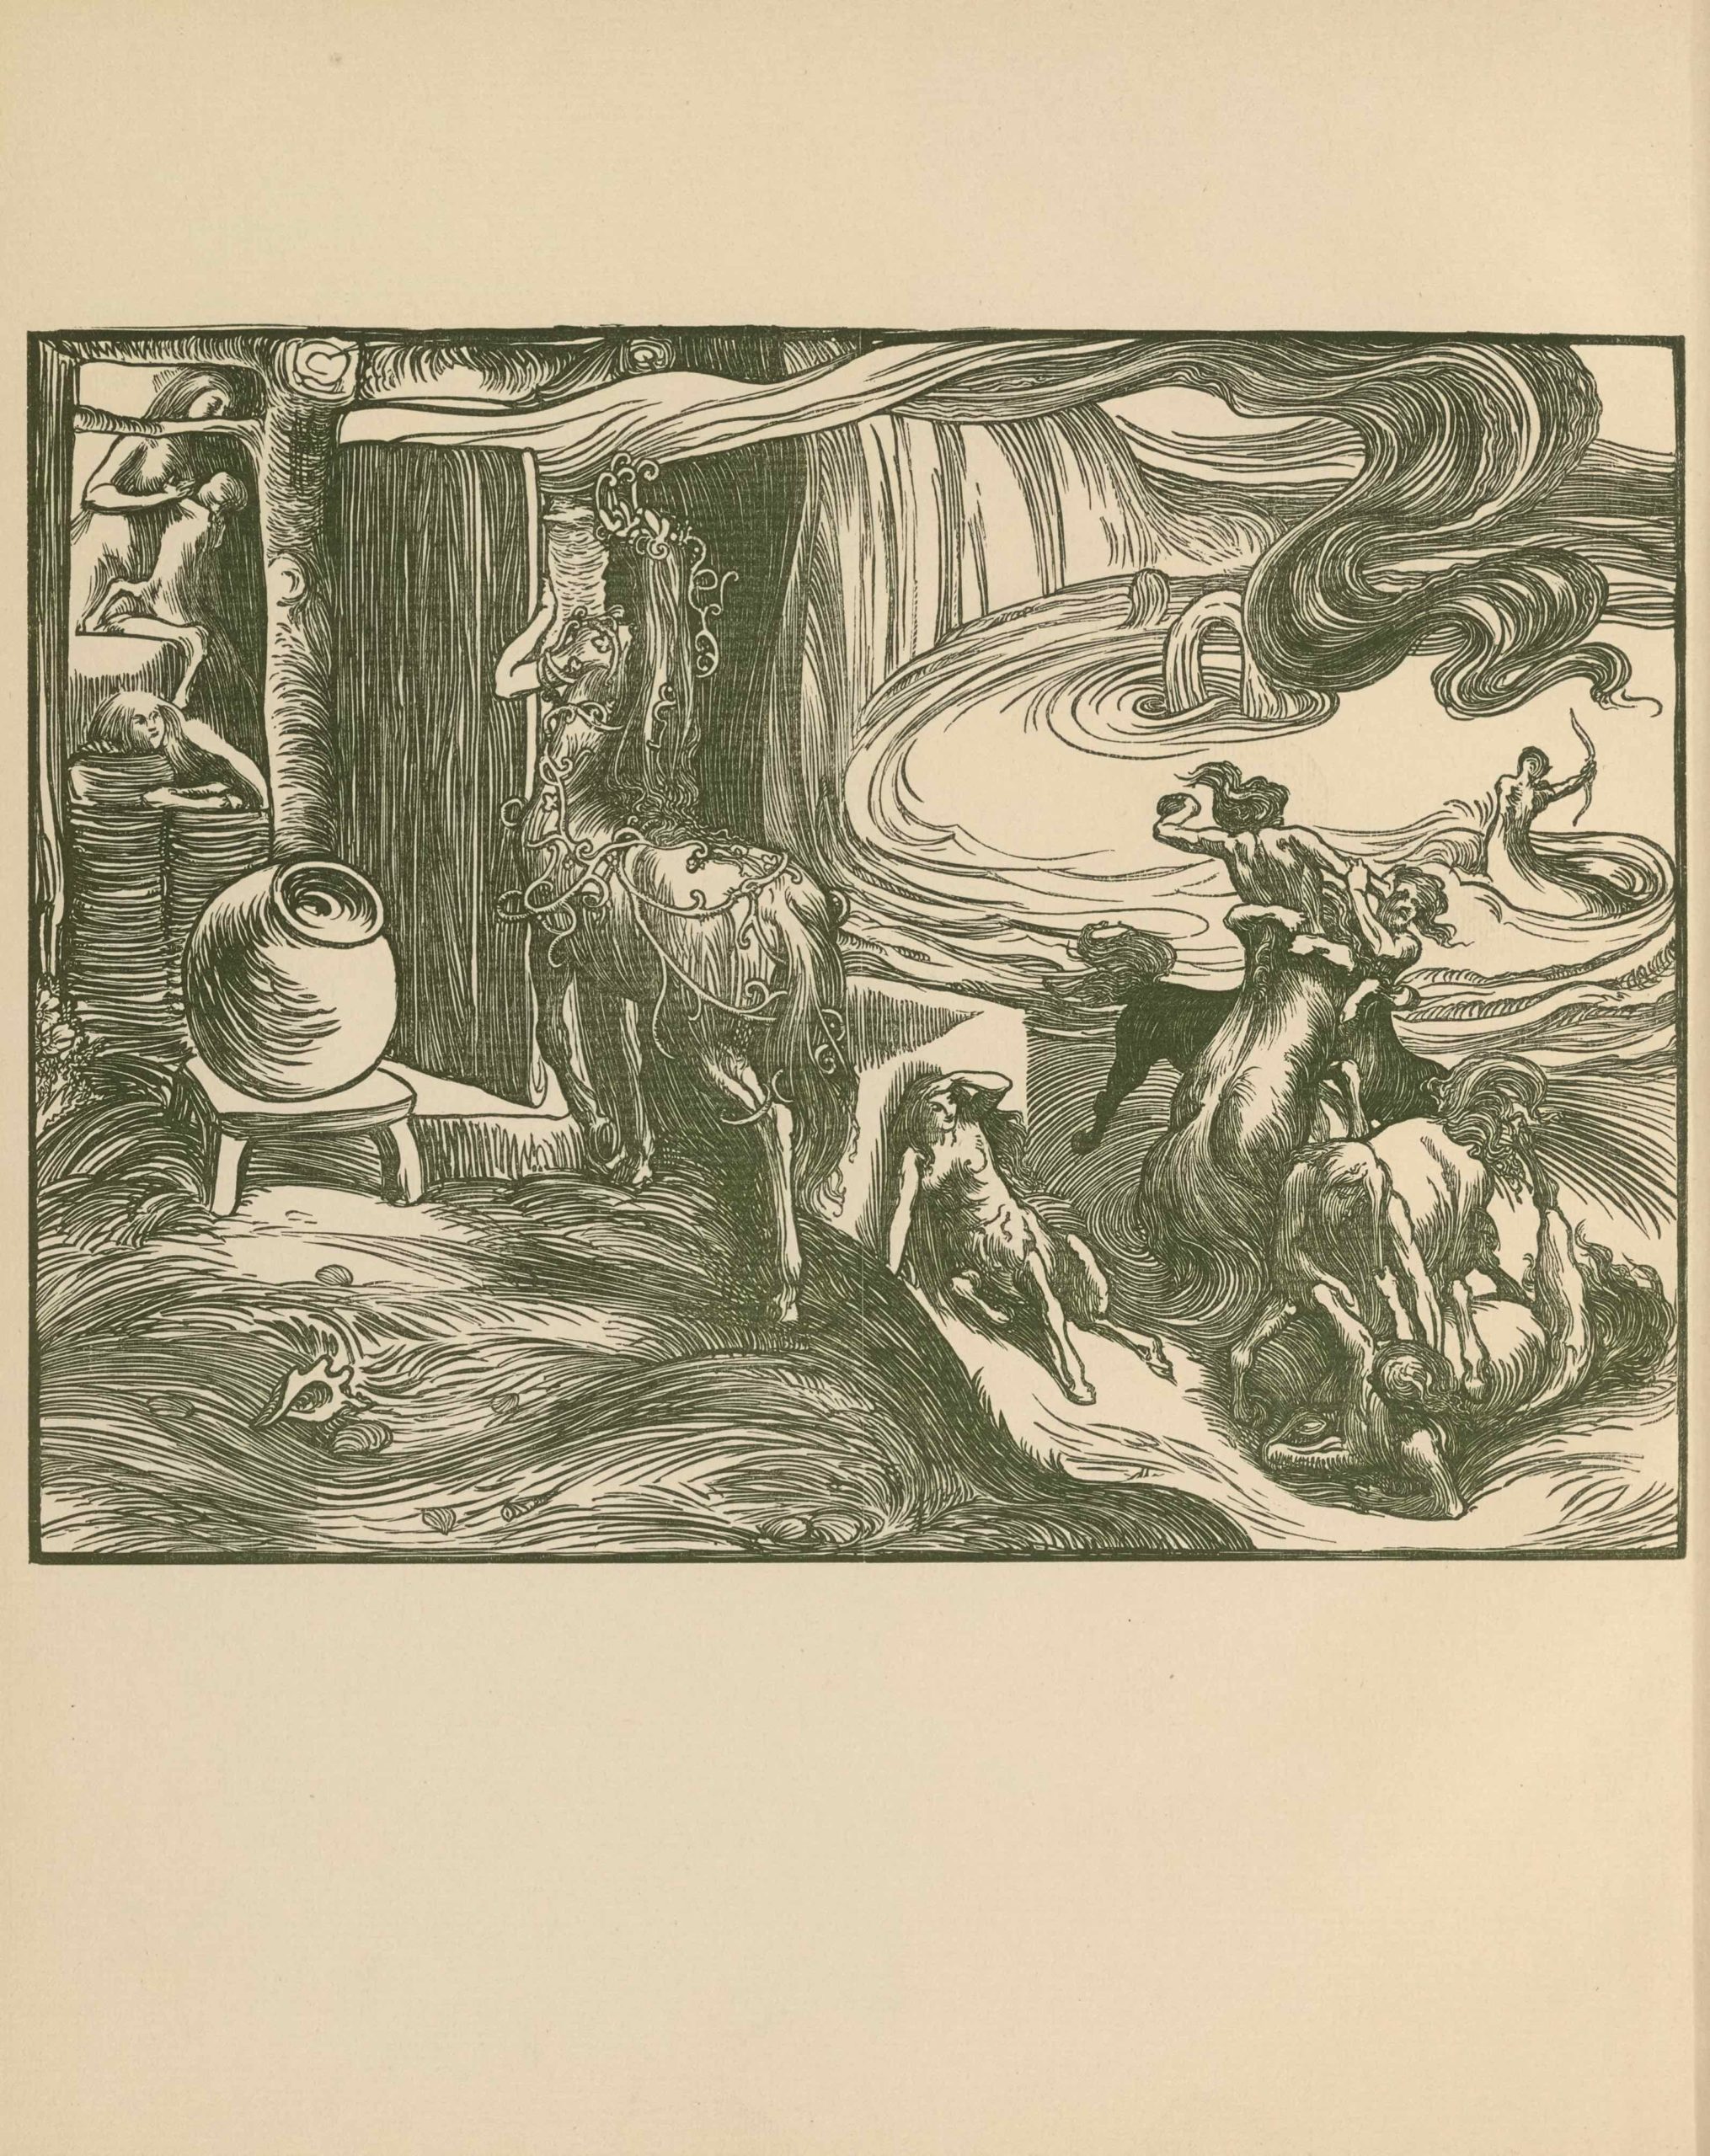 The wood-engraved image is set into a square, ruled border, printed, as is the 
                        image, in dark green ink. The image depicts an imaginary scene by a grotto and waterfall, 
                        where centaurs of various ages and sexes go about their daily life. The viewing position 
                        is somewhat above, looking down. The left half of the picture shows a crude home for the 
                        centaurs and the right half of the picture shows the landscape in which they live. In the 
                        centre foreground, a female centaur stands with her back to the viewer; she appears about 
                        to enter the wooden building. She has long hair and wears a vine-like headdress that extends 
                        down her body, entangling her tail and hind legs. She stands in front of the open doorway, 
                        holding a wooden doorframe in front of her to the right. Her shadowed face is in profile. 
                        In the interior of the building, in the extreme left, is a female centaur suckling an infant 
                        centaur while another child centaur leans on several urns. Between these centaurs and the 
                        centaur wearing the headdress is a large round urn resting on a stool. Behind the urn a tree 
                        that appears to be a supporting beam for the building extends up to the top of the frame, 
                        with branches that span to the left and right. In front of the urn is a grassy sward, 
                        extending to the right half of the image. In the right foreground four male centaurs engage 
                        in wrestling in front of a pool, where other centaurs are swimming, one of which is holding 
                        an archer’s bow. Behind the pool, a waterfall is depicted. A female centaur rests against a 
                        wall structure observing the wrestling. In the grassy ground are a few small seashells. Two 
                        flowers are beside the grass on the left side of the frame.